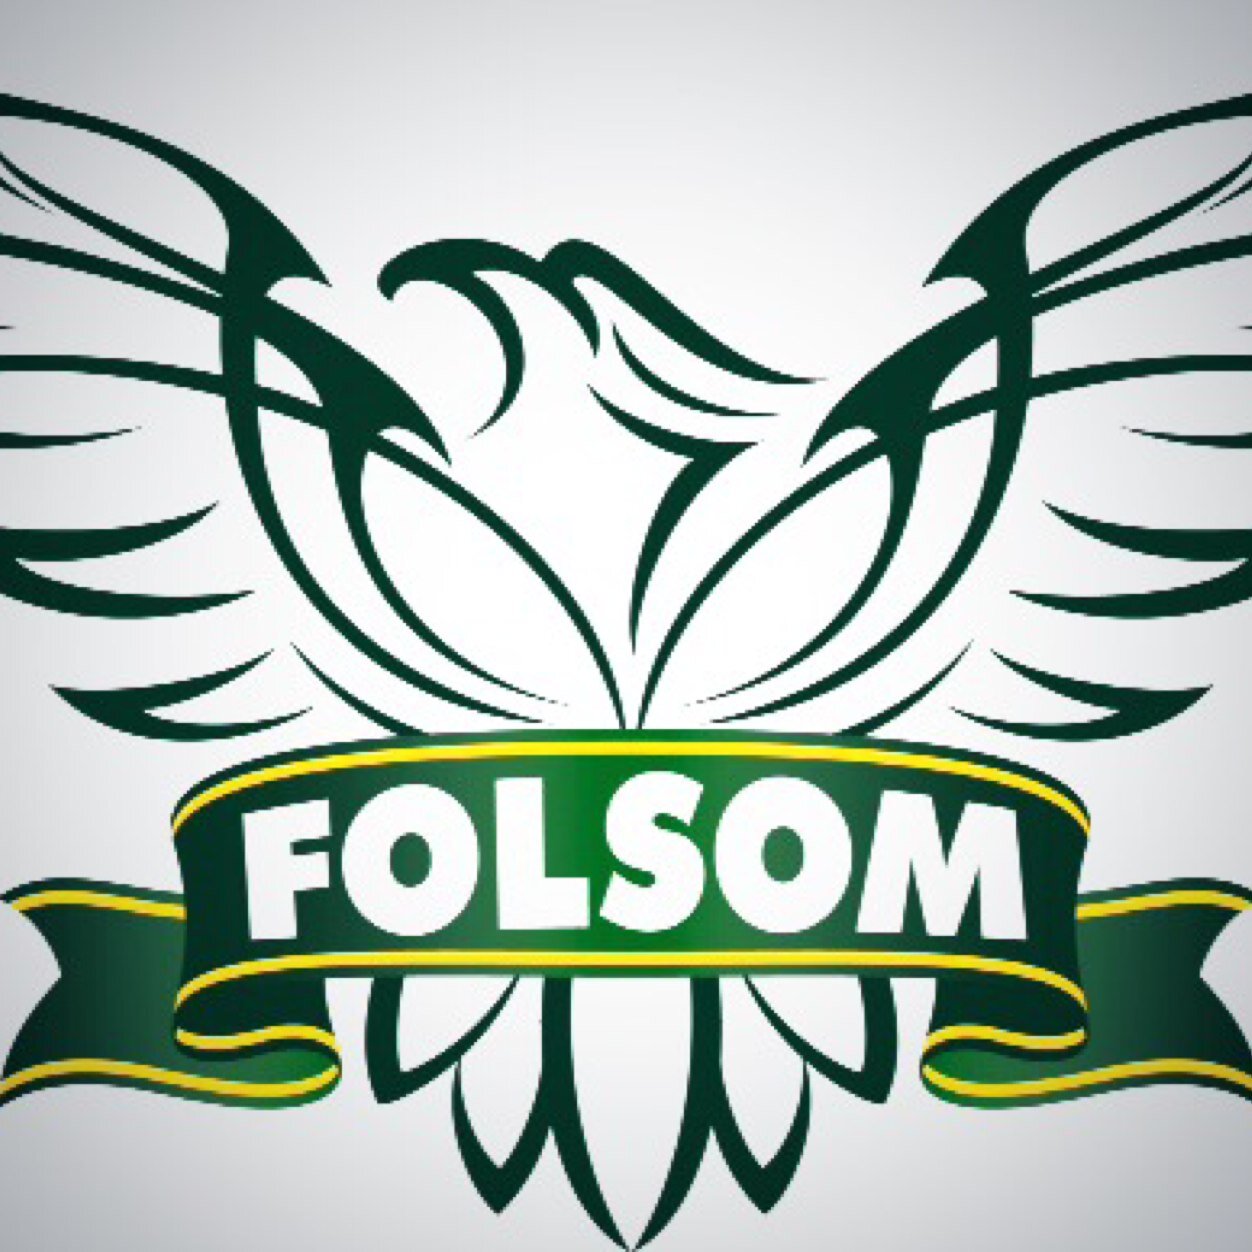 Folsom Elementary is located in Prosper, TX and is the 1st Prosper ISD Elementary. Folsom Fierce.